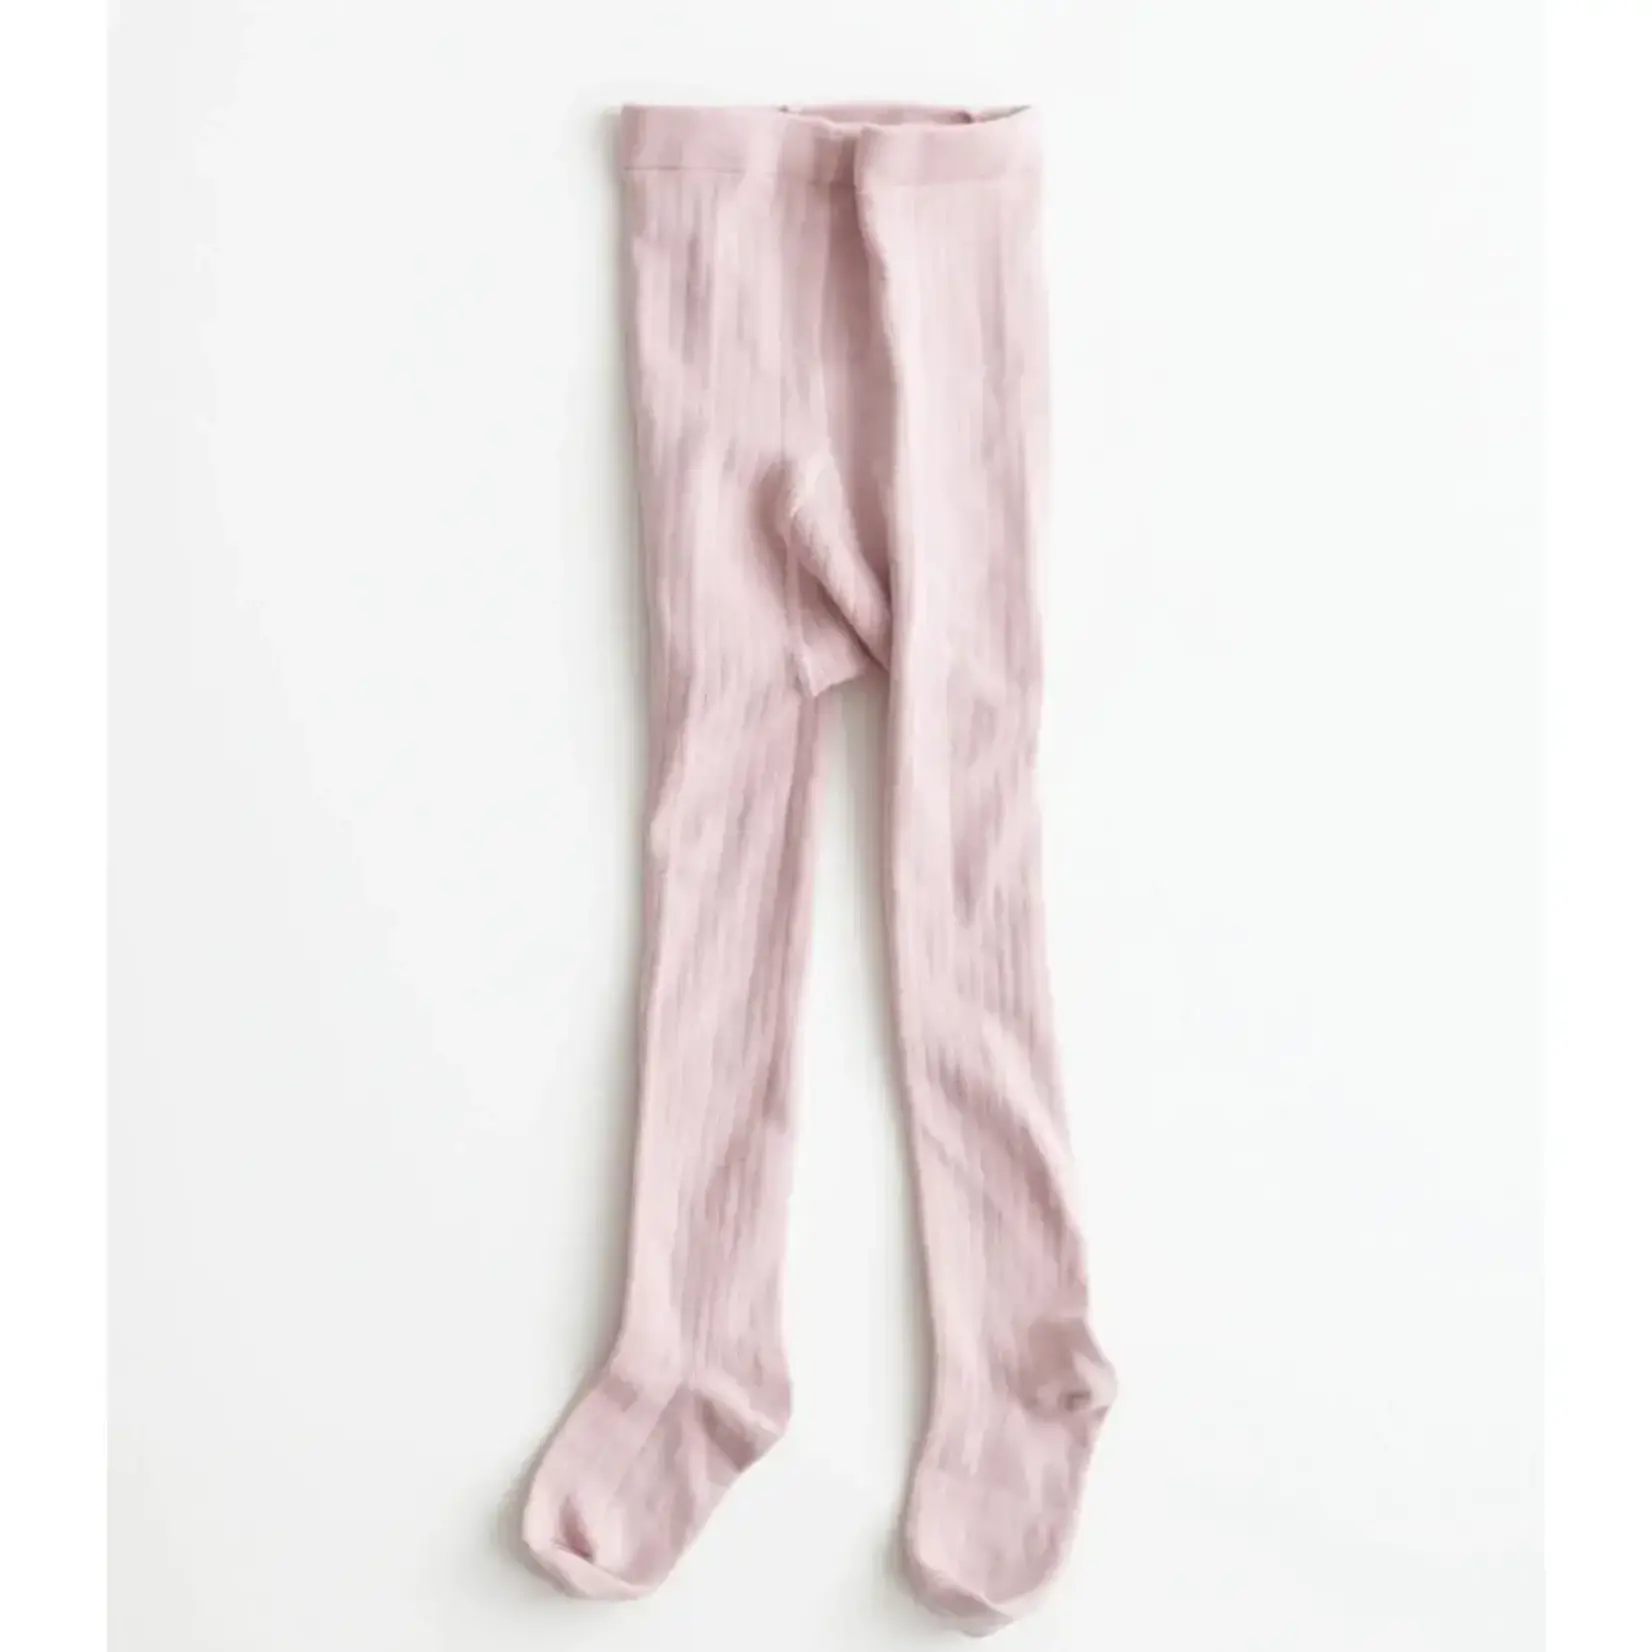 Lali Cotton Tights - Pink - 12M